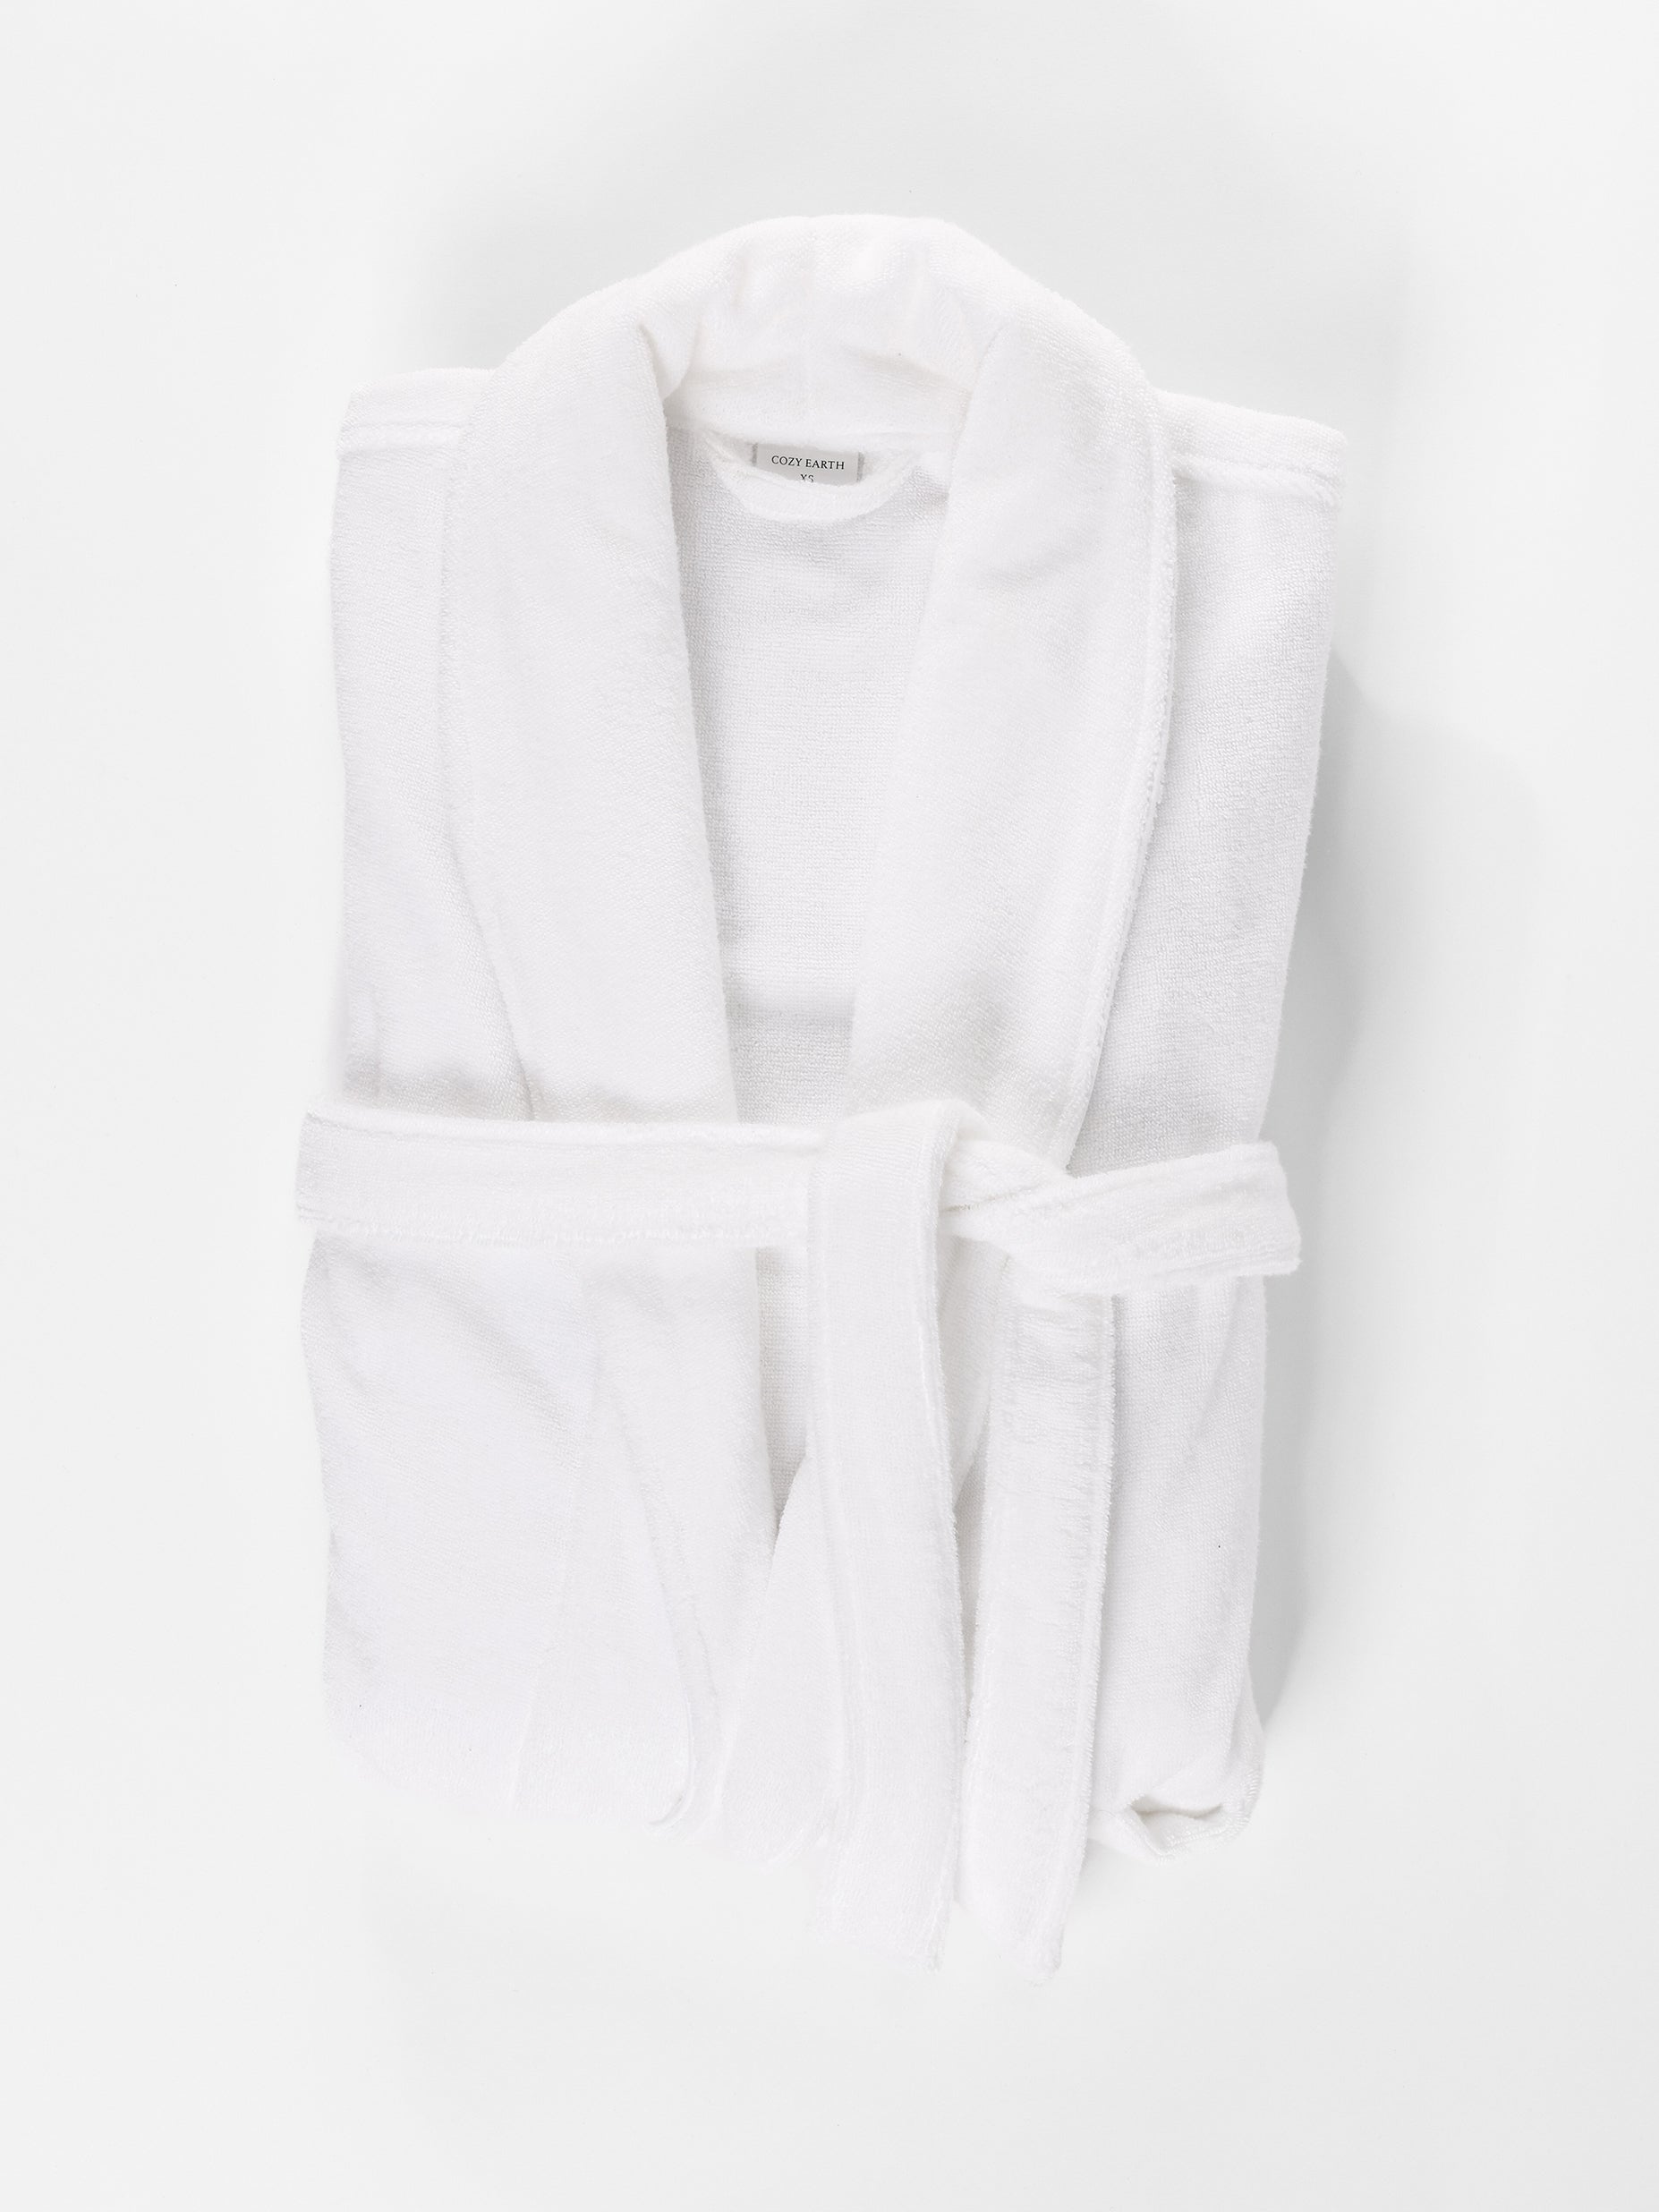 White bath robe folded with white background |Color:White